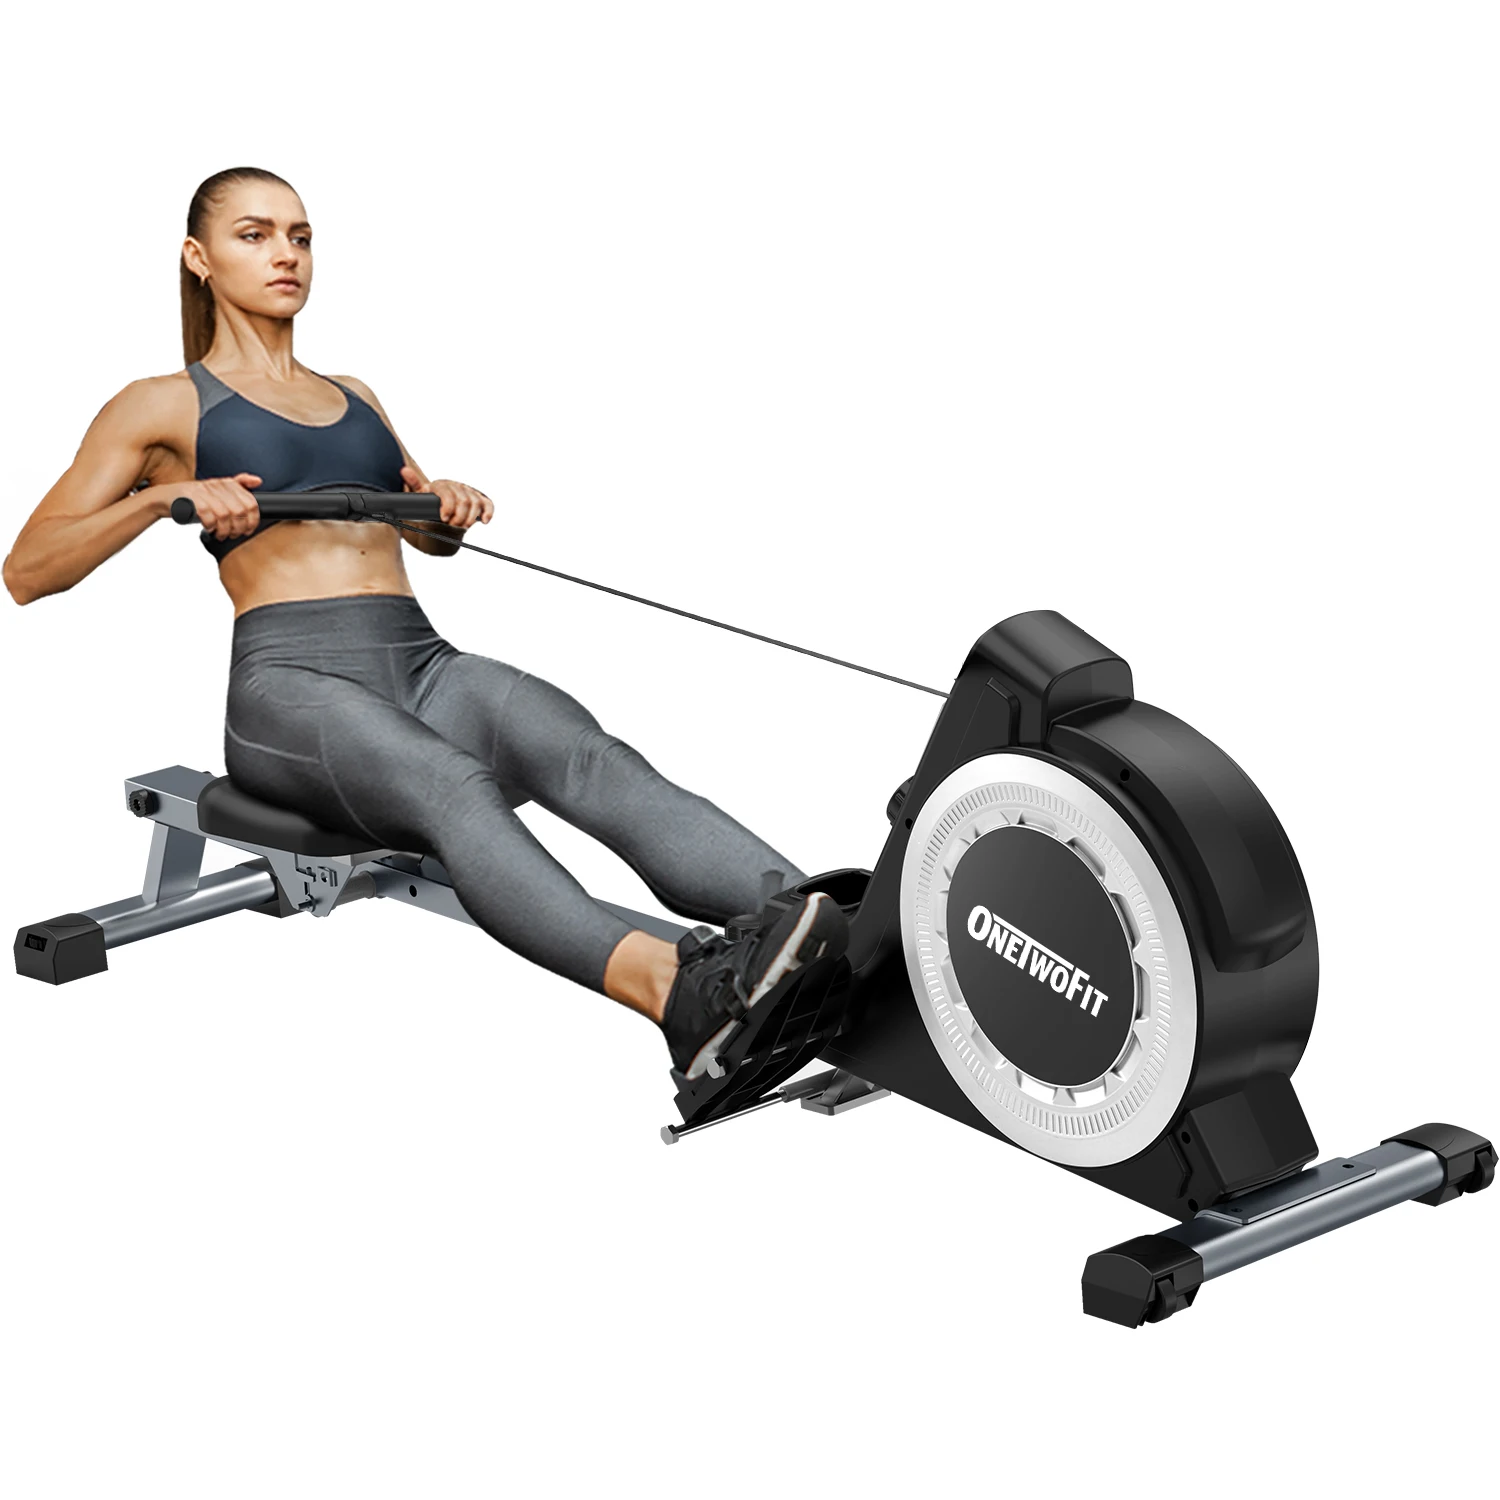 

Onetwofit Gym Equipment household Fitness Indoor Rower Folding Exercise Magnetic Seated Air Rowing Machine With Screen